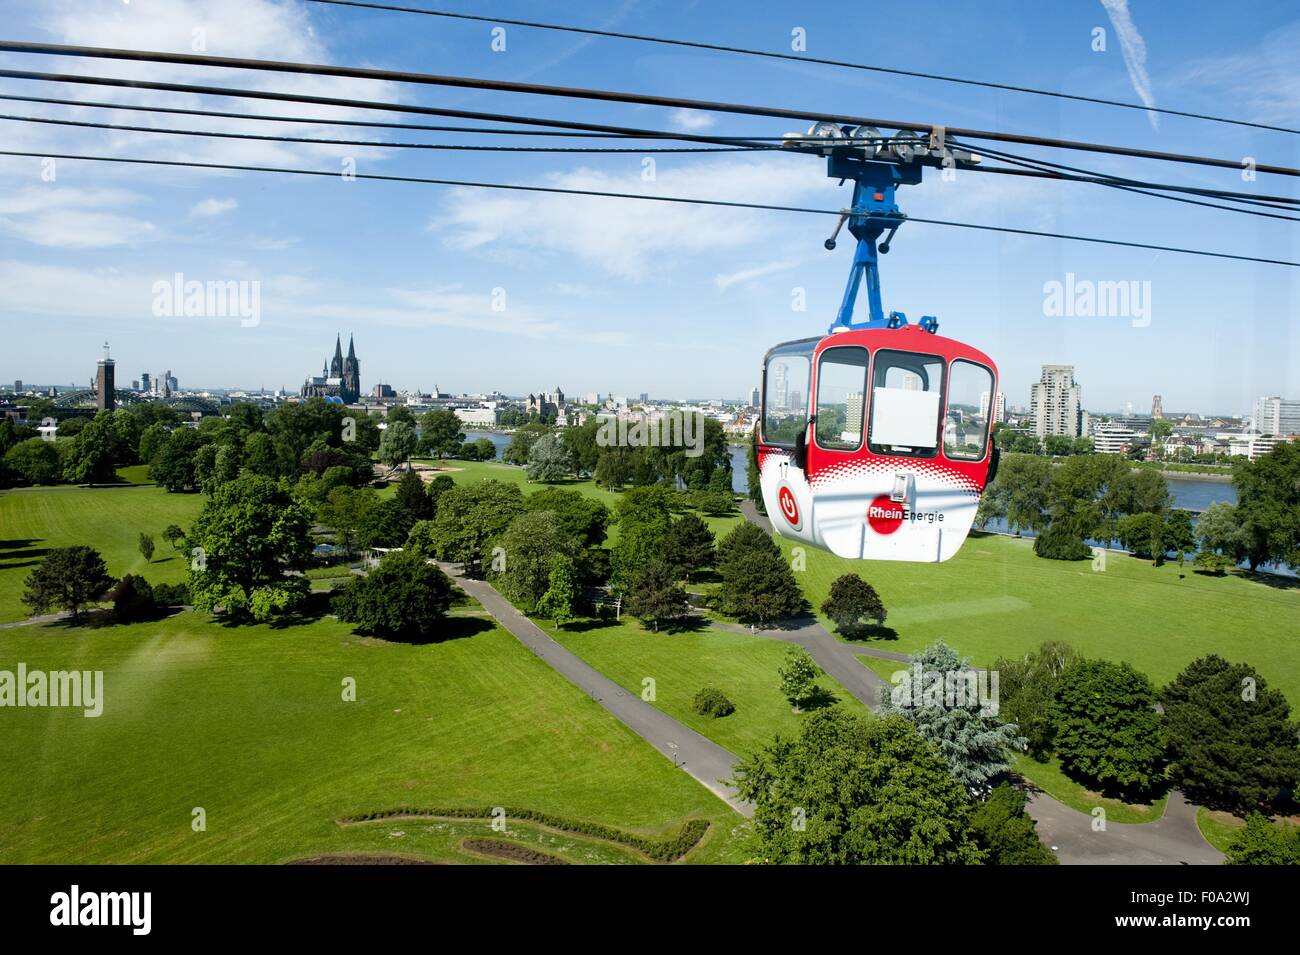 View of city and cable car in Rheinpark, Cologne, Germany Stock Photo